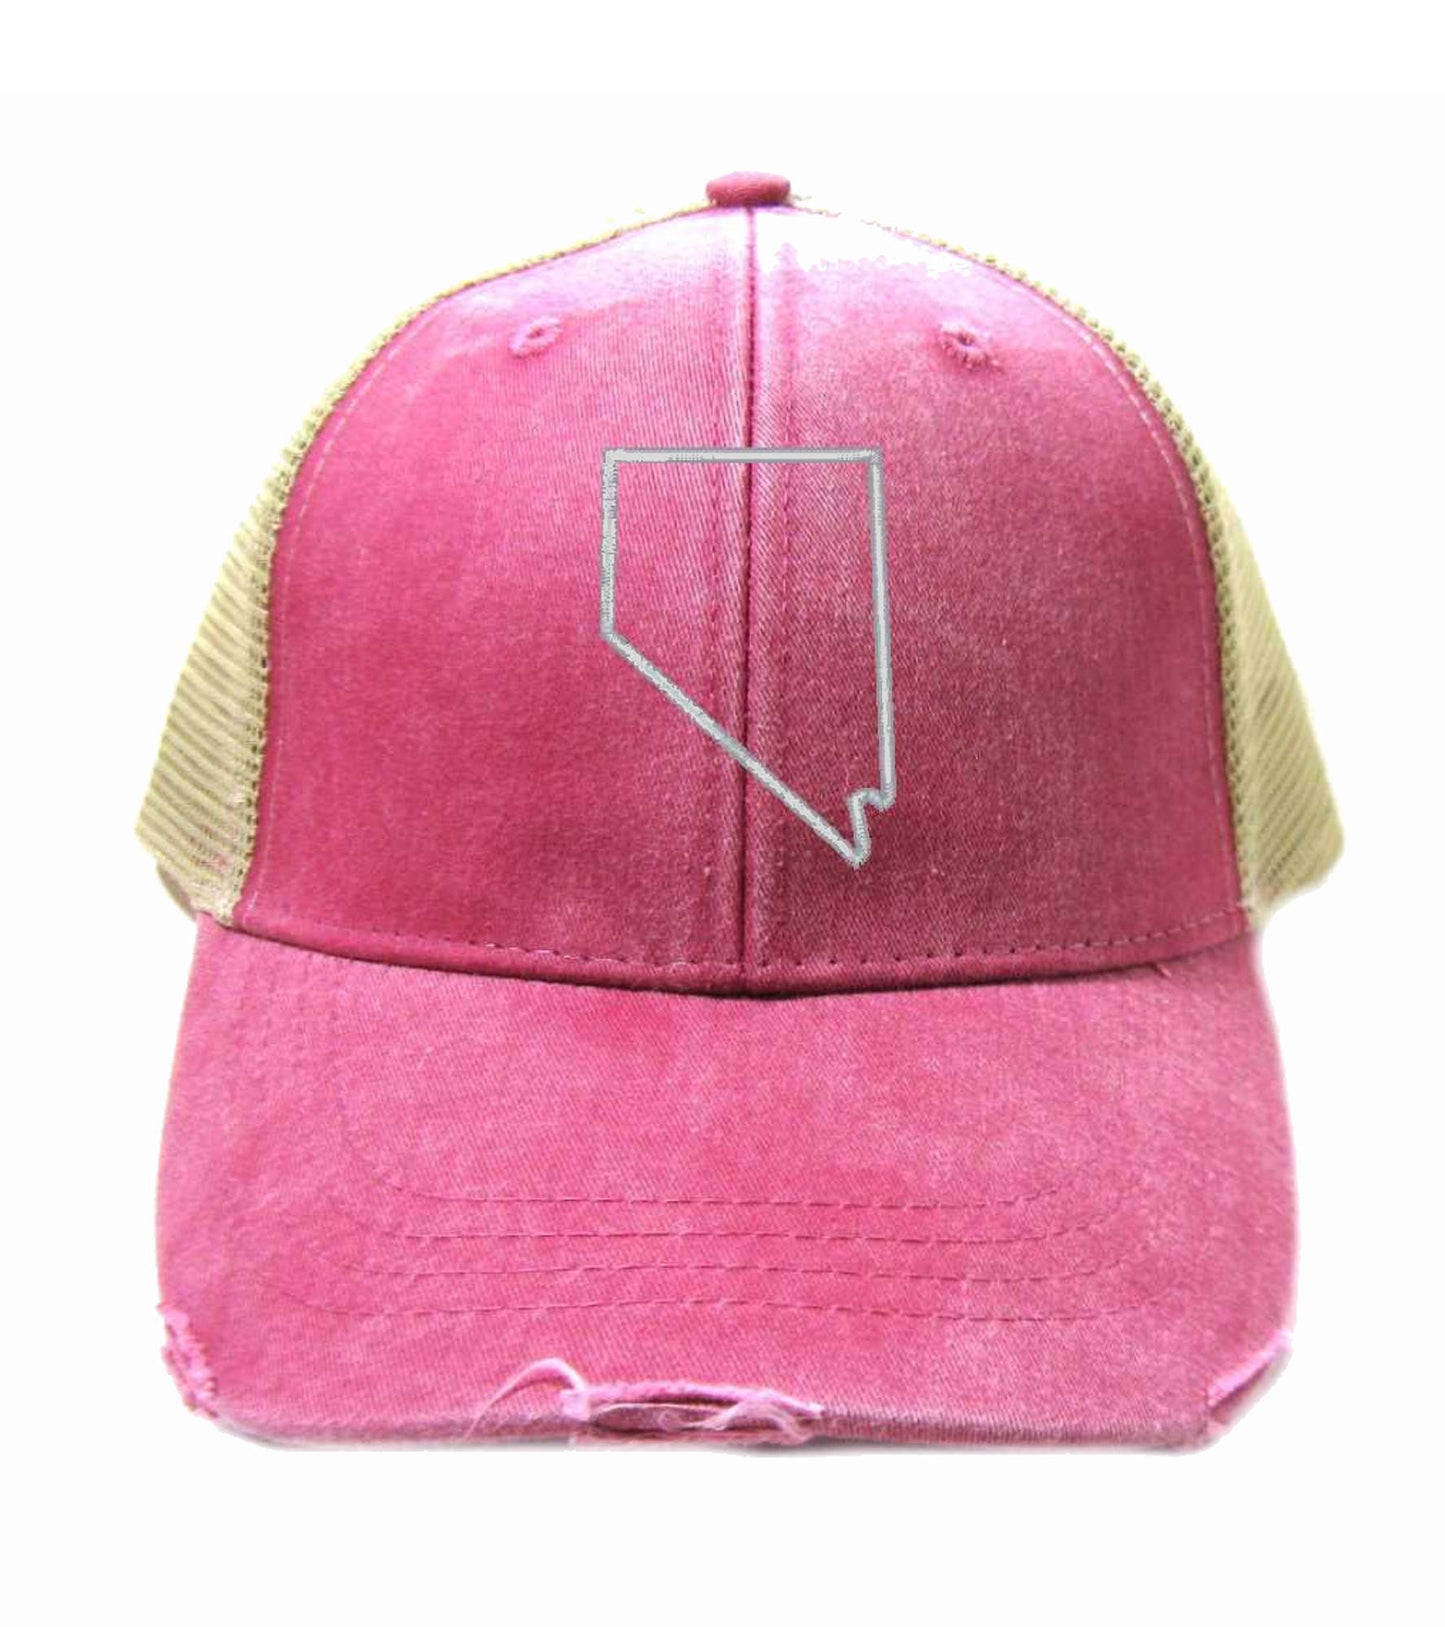 Nevada Hat - Distressed Snapback Trucker Hat - Nevada State Outline - Many Colors Available